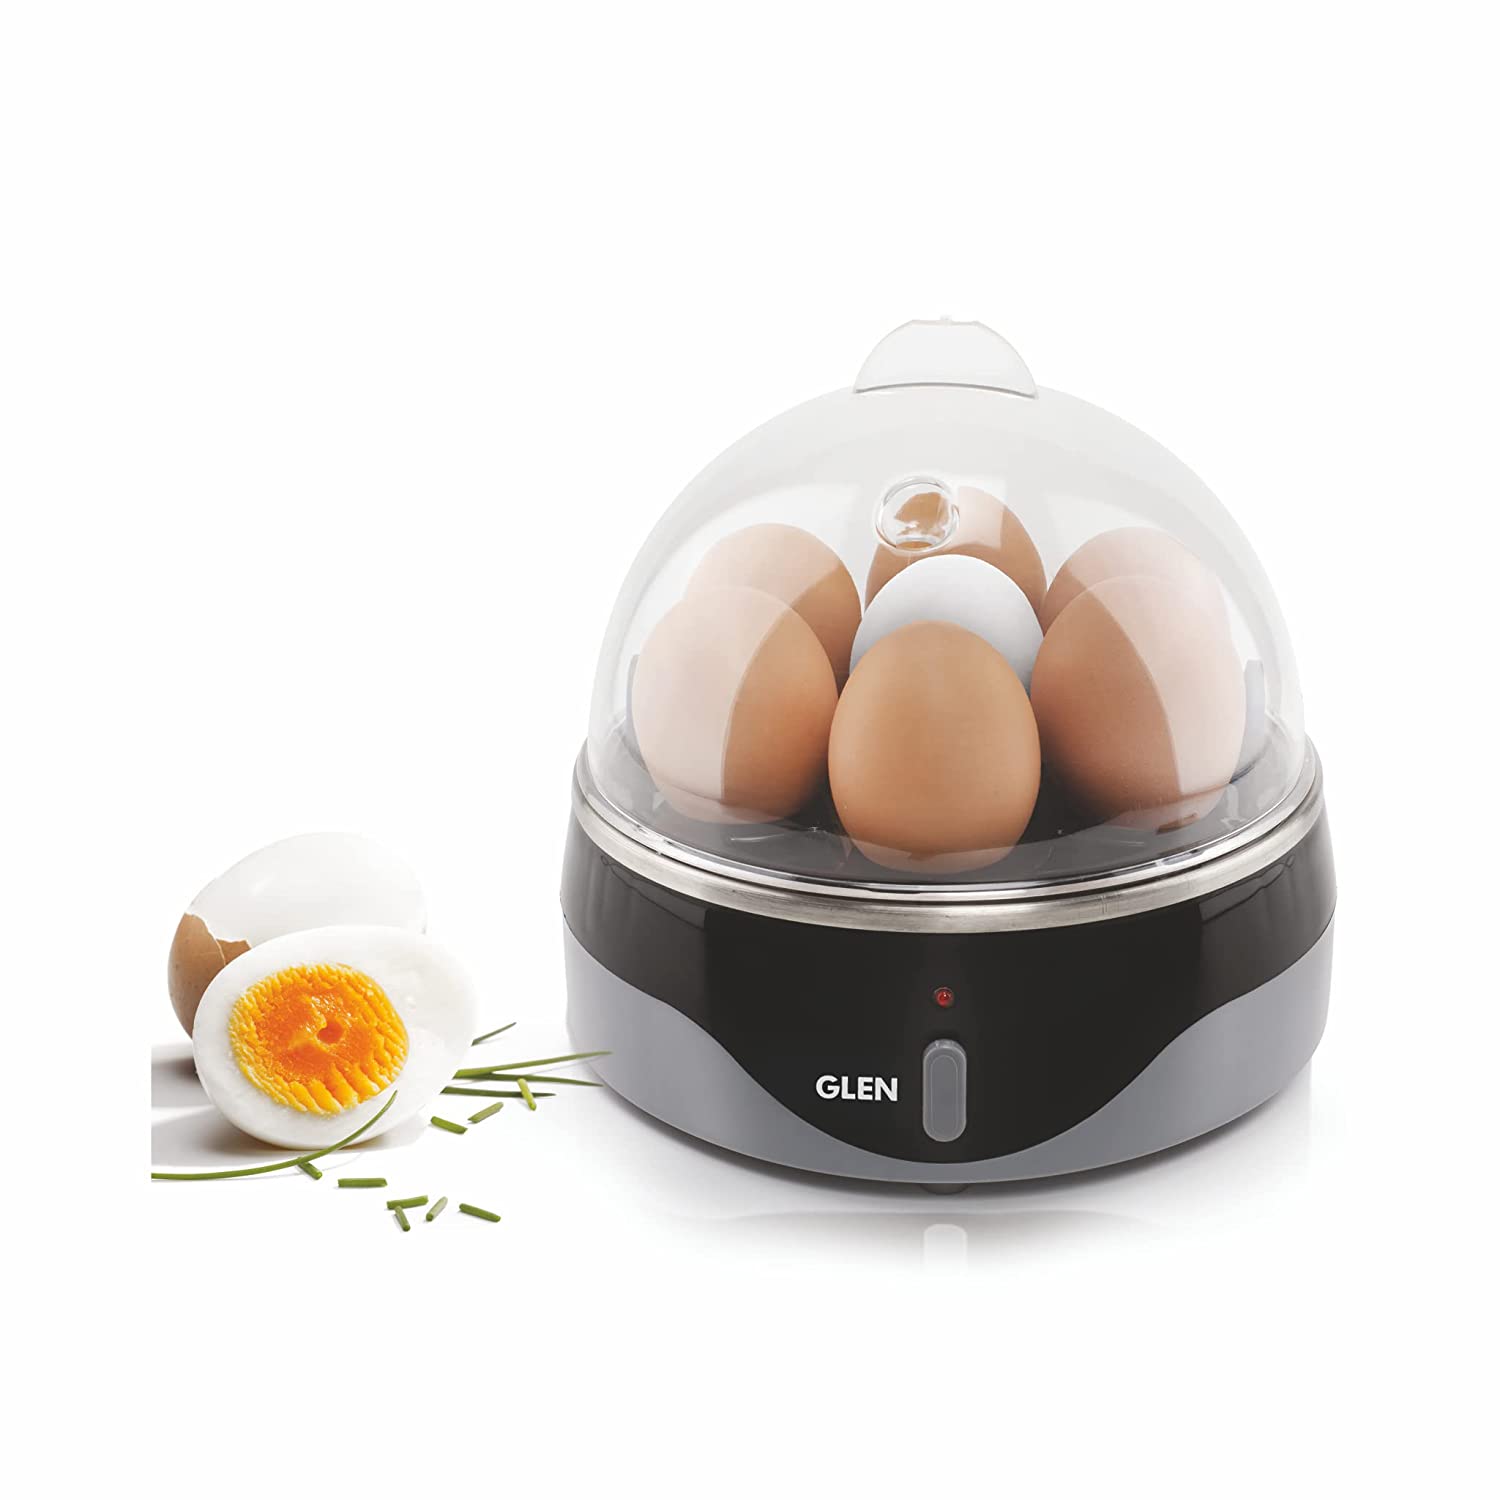 Buy Egg Boiler 3 in 1 Electric Multi Cooker online at Best Prices